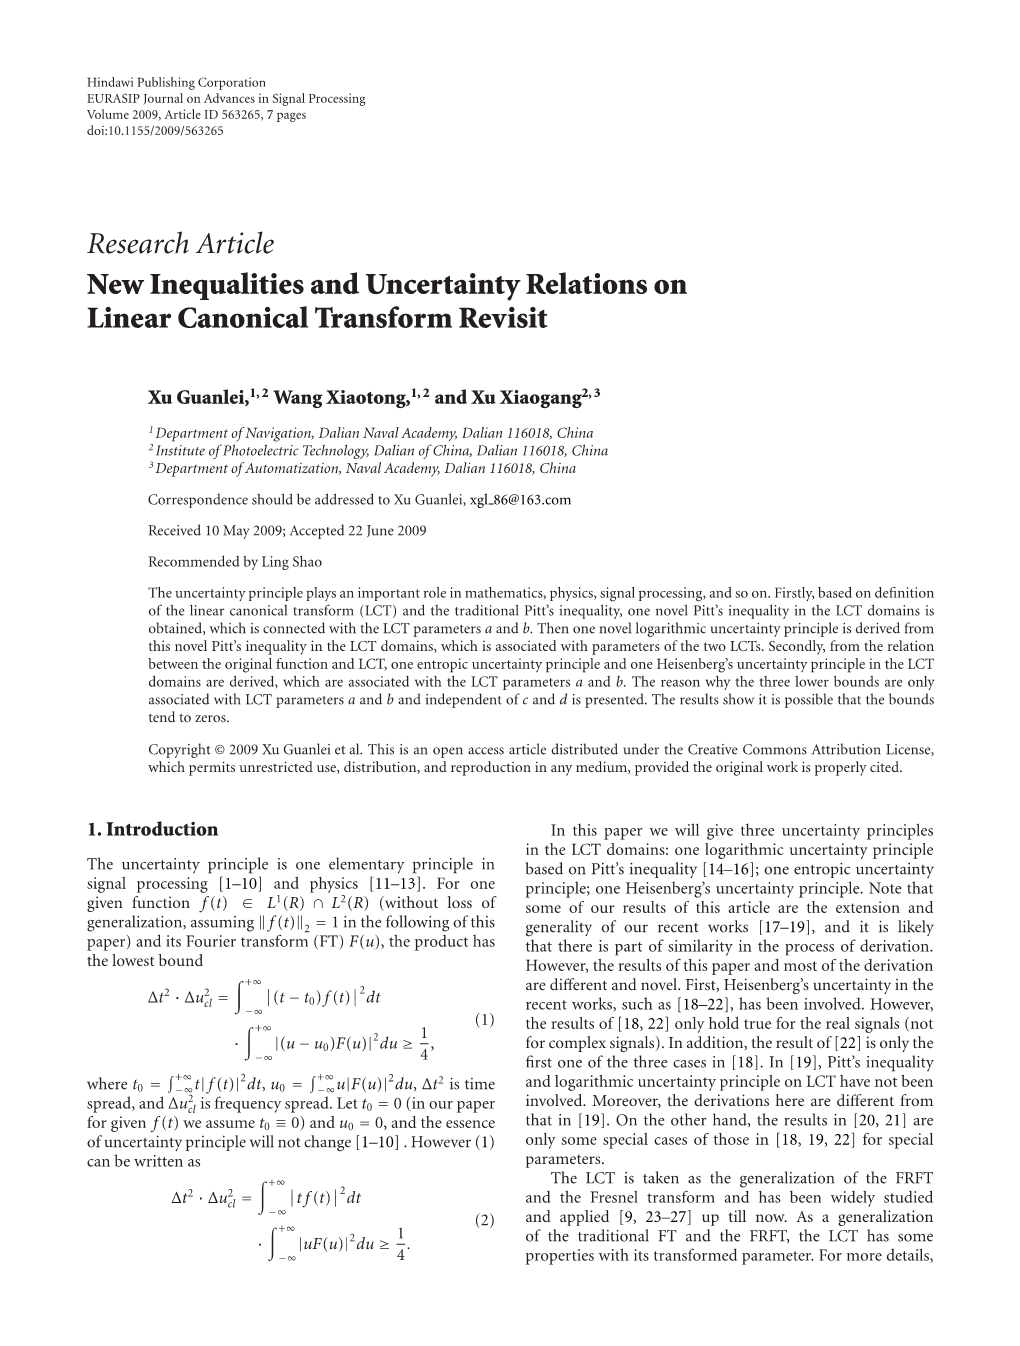 New Inequalities and Uncertainty Relations on Linear Canonical Transform Revisit